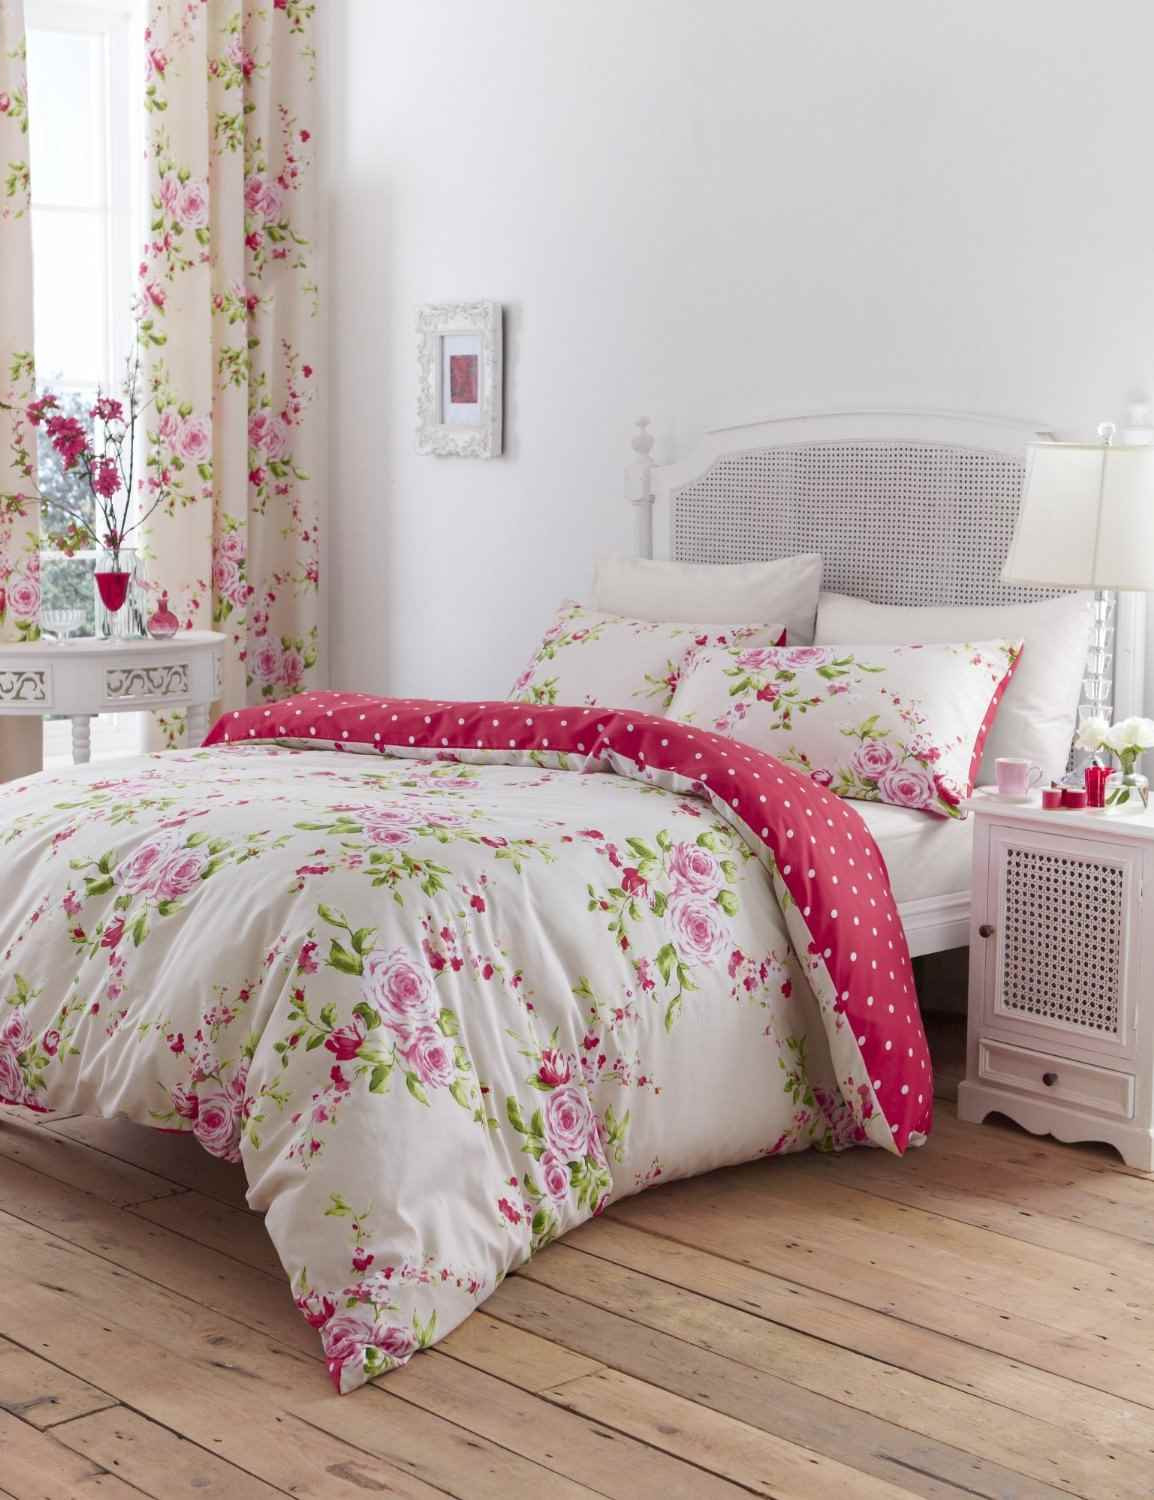 Pink Shabby Chic Bedroom
 Shabby chic pink and cream floral bedding set The Shabby